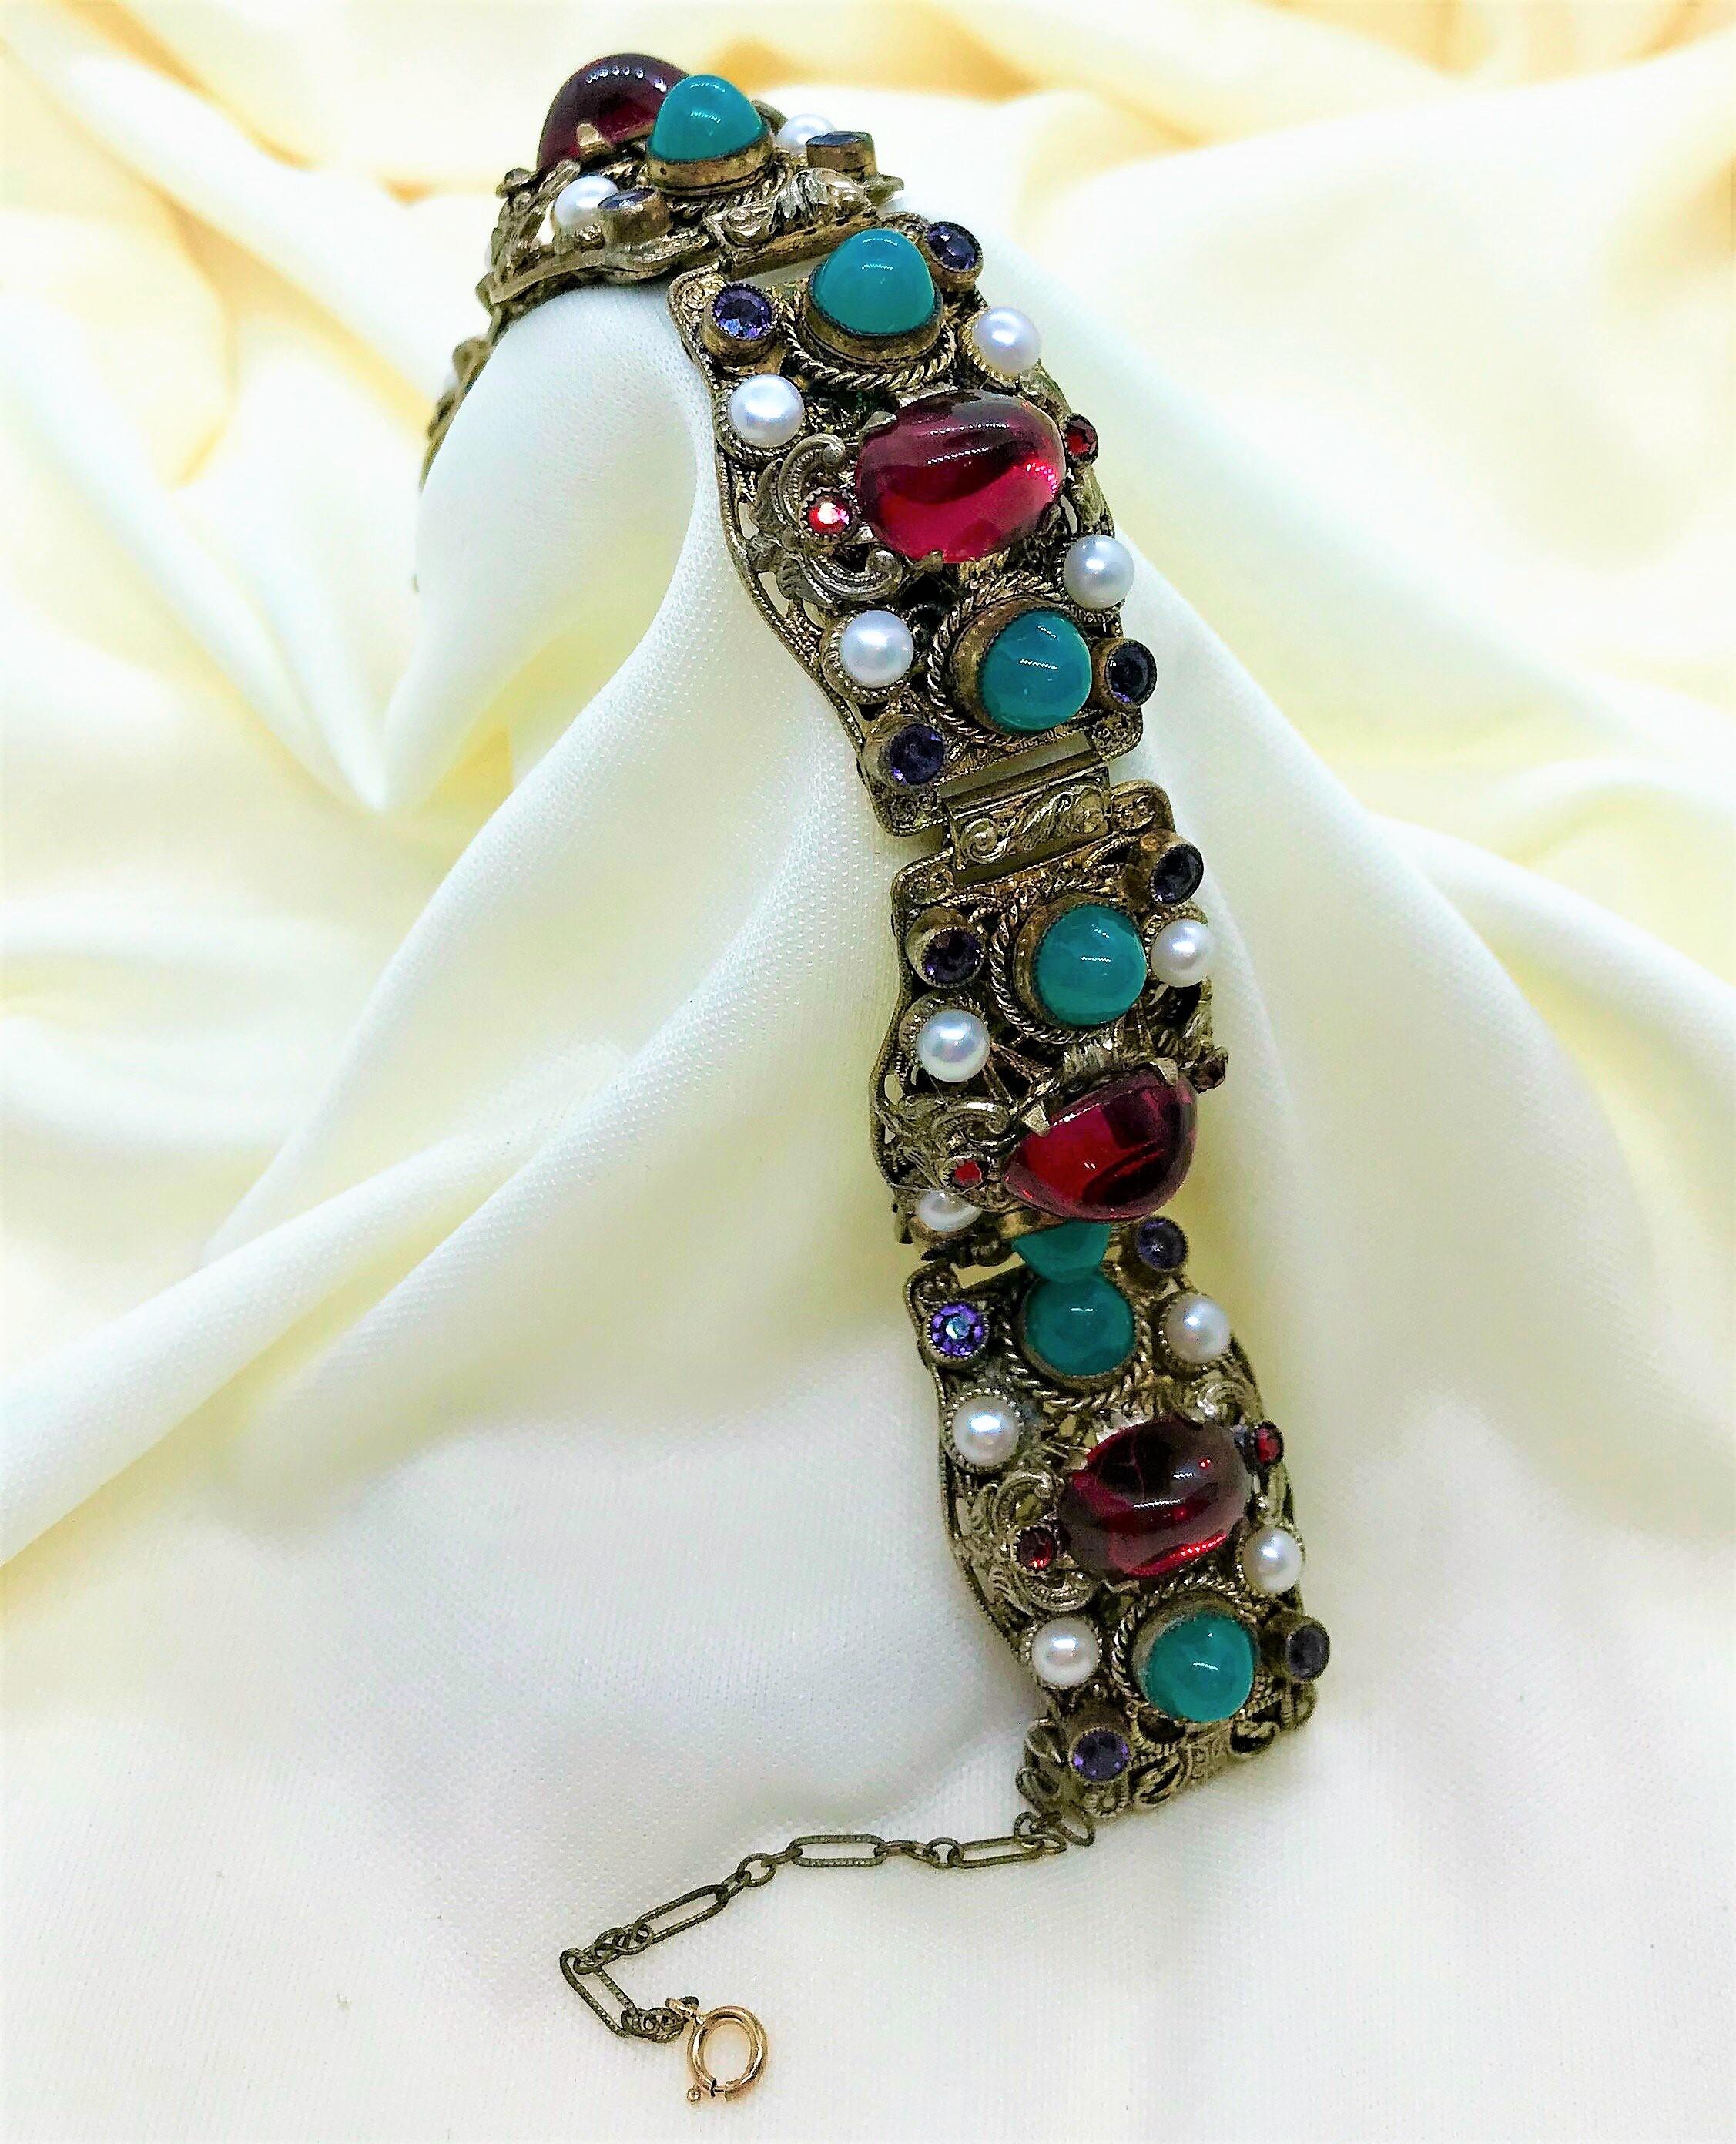 Circa 1950 Austro Hungarian Revival Jeweled Bracelet  In Good Condition For Sale In Long Beach, CA